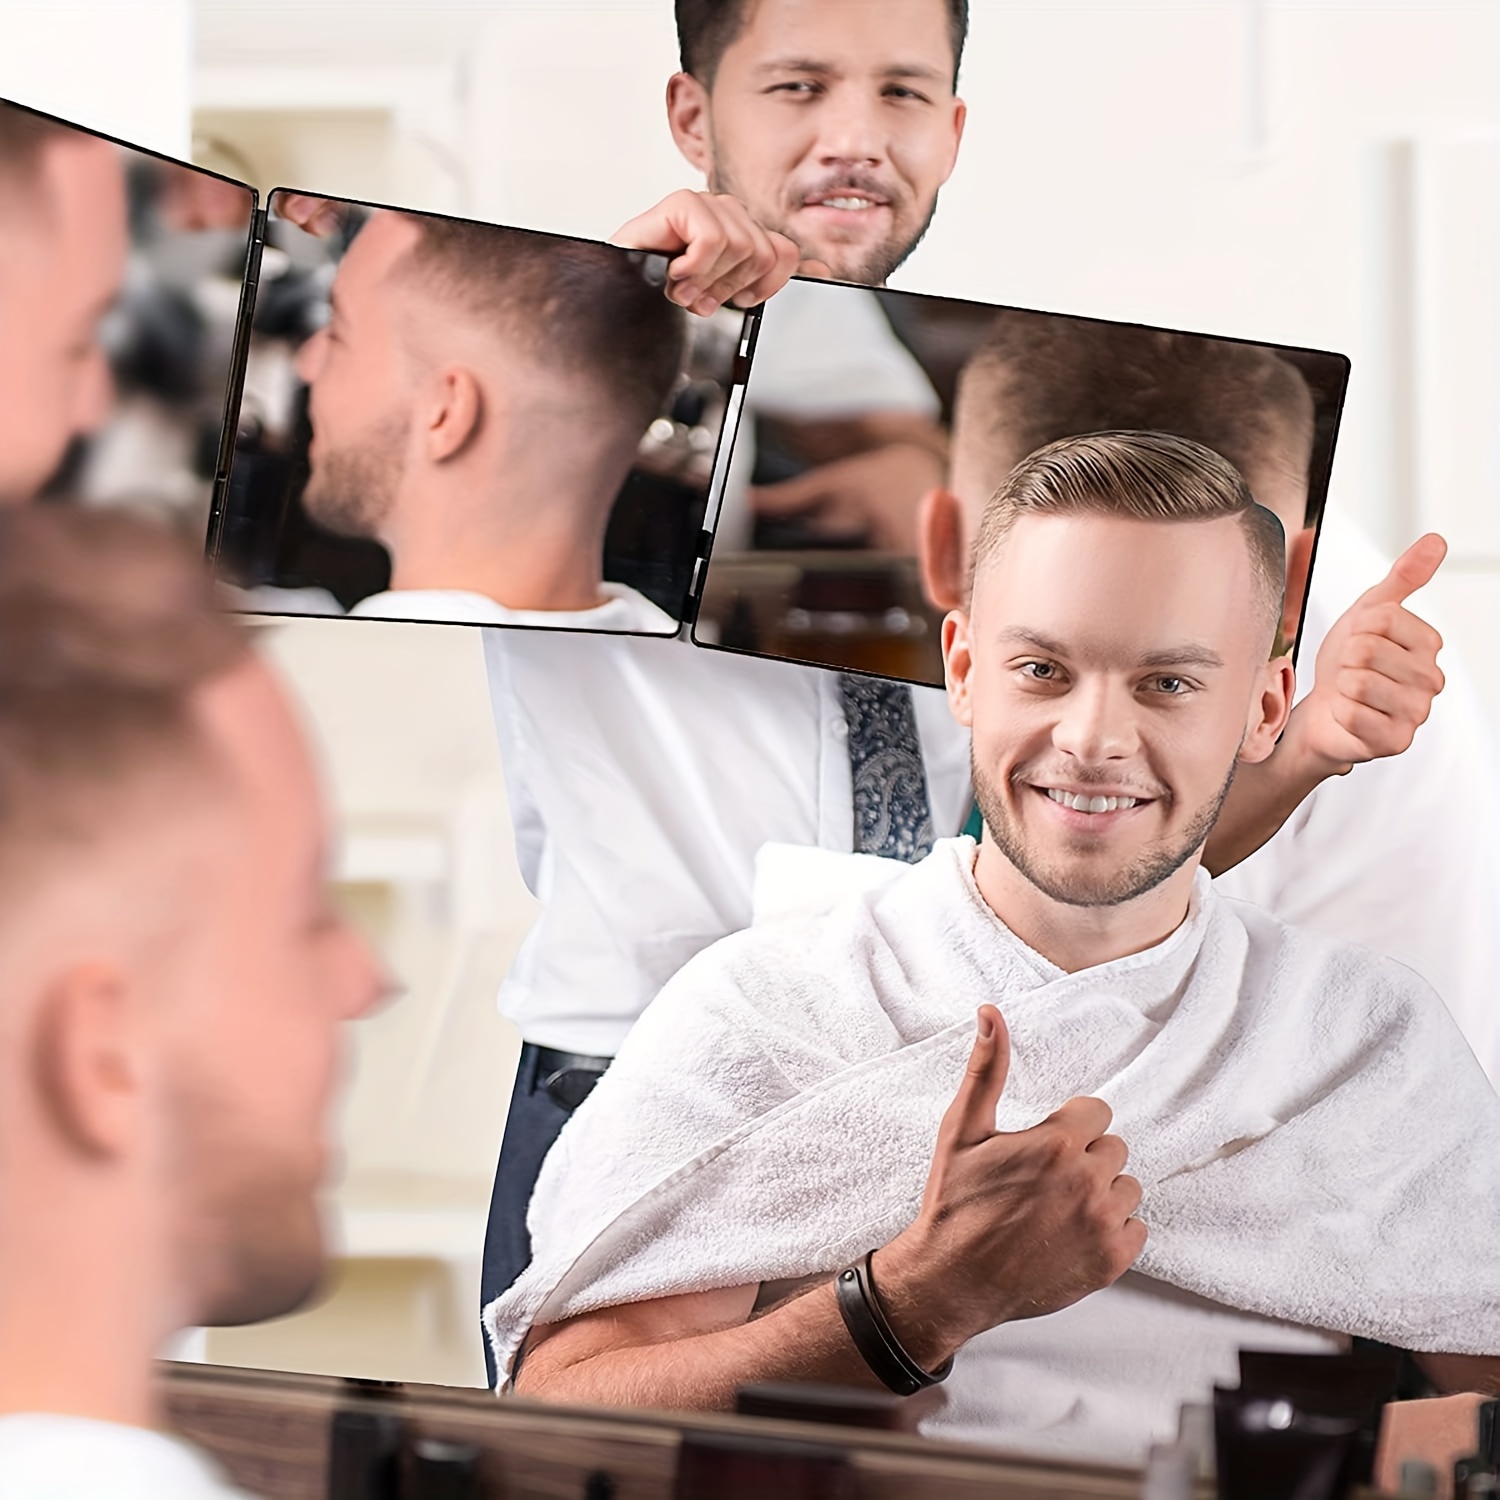 3 Way Mirror for Hair Cutting 360 Mirror Self Haircut Mirror Home Styling  Barber Mirror Haircut Mirror with Trifold Self Cut Mirror Easy to Install Self  Haircut System for Men and Women